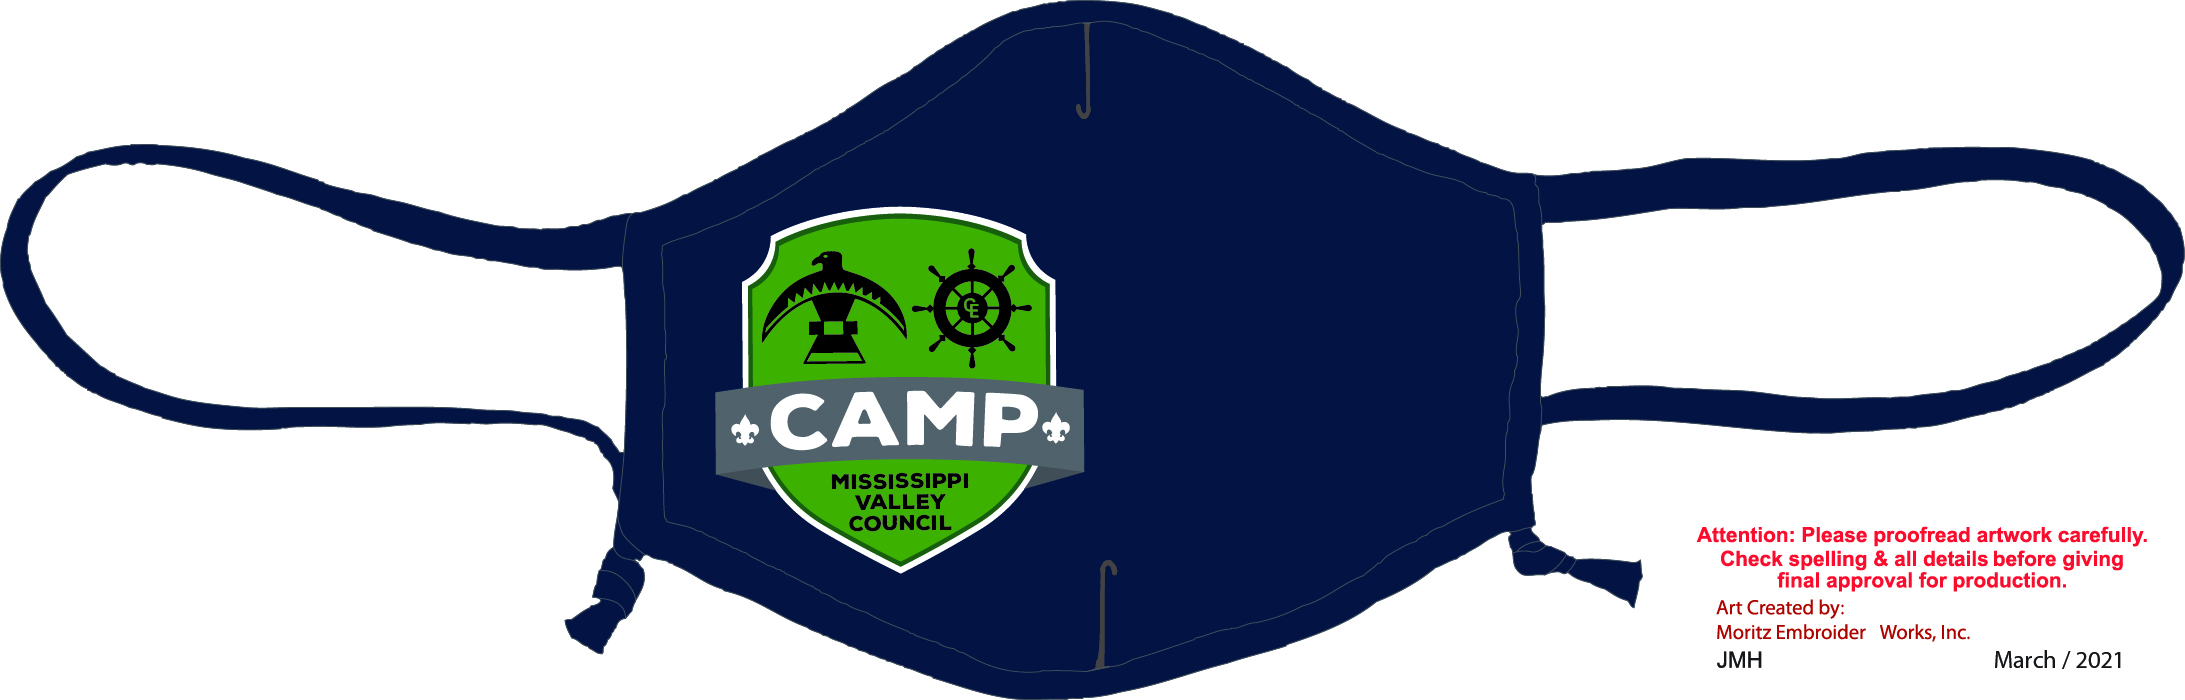 MississippiValleyCouncil CampShield Mask3 display 2021 (002)